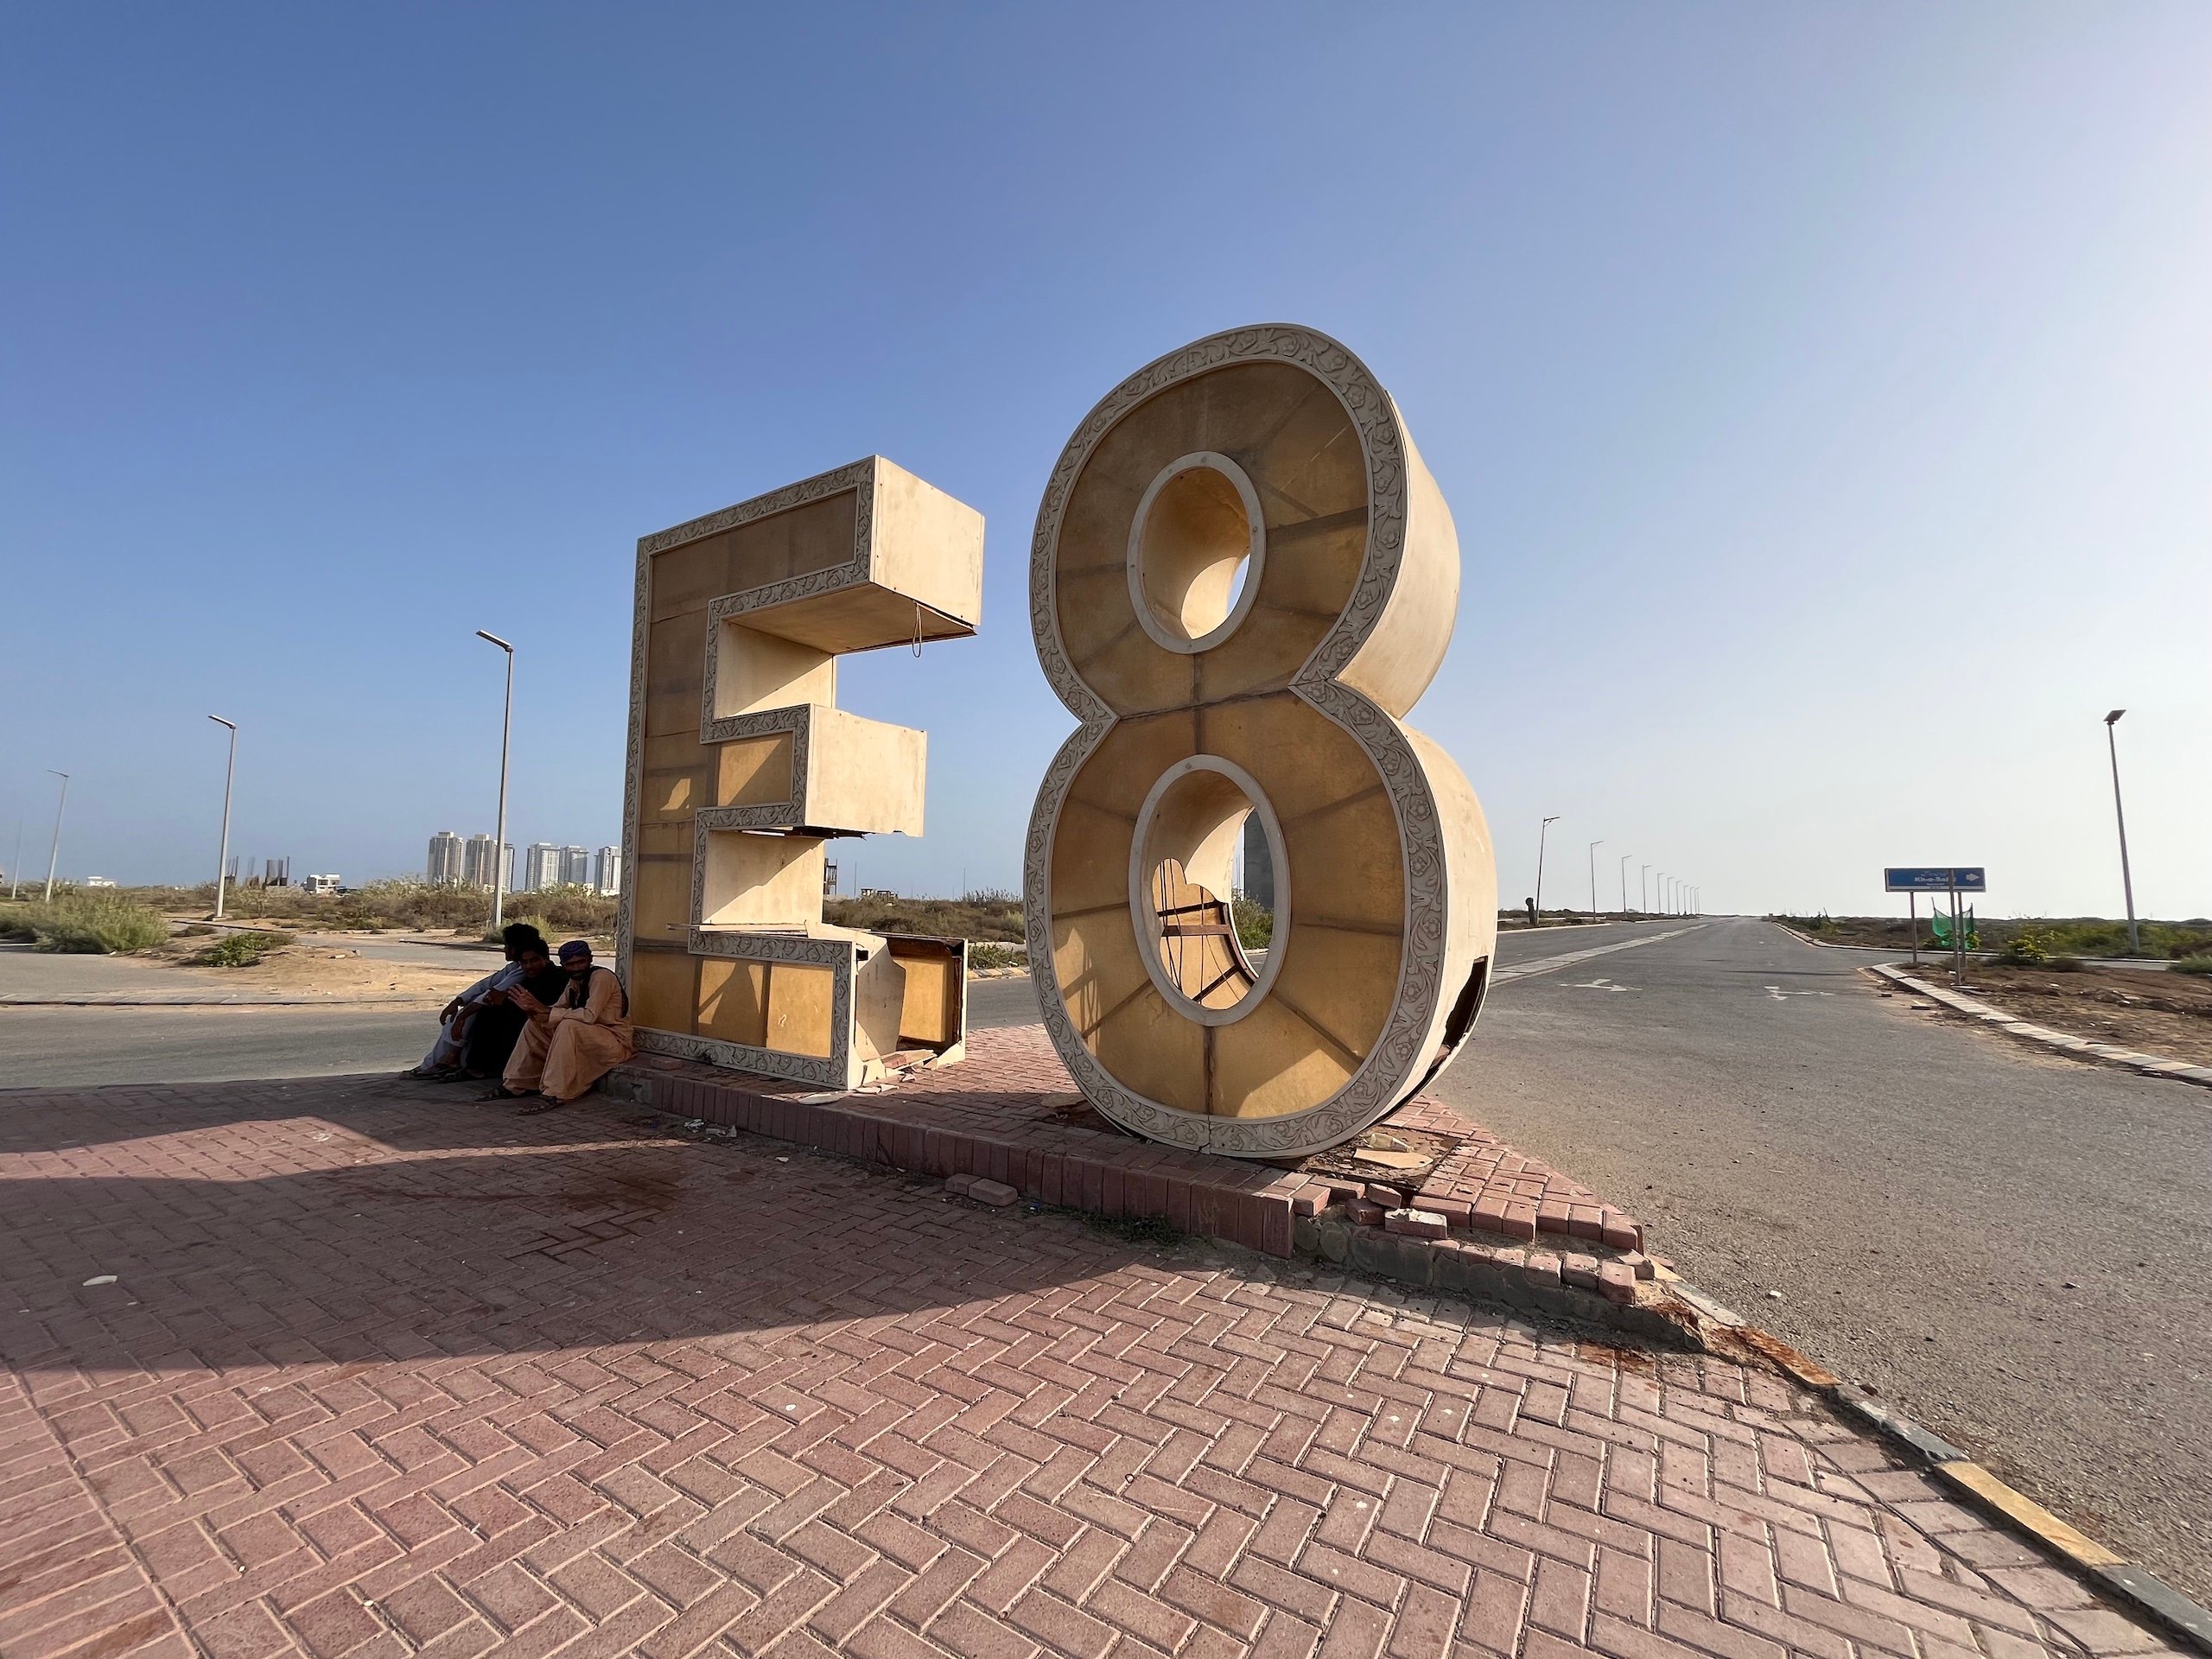 Sculpture of the characters 'E8' - E8 is the sixth section of the DHA’s Phase 8 housing development in Karachi, Pakistan